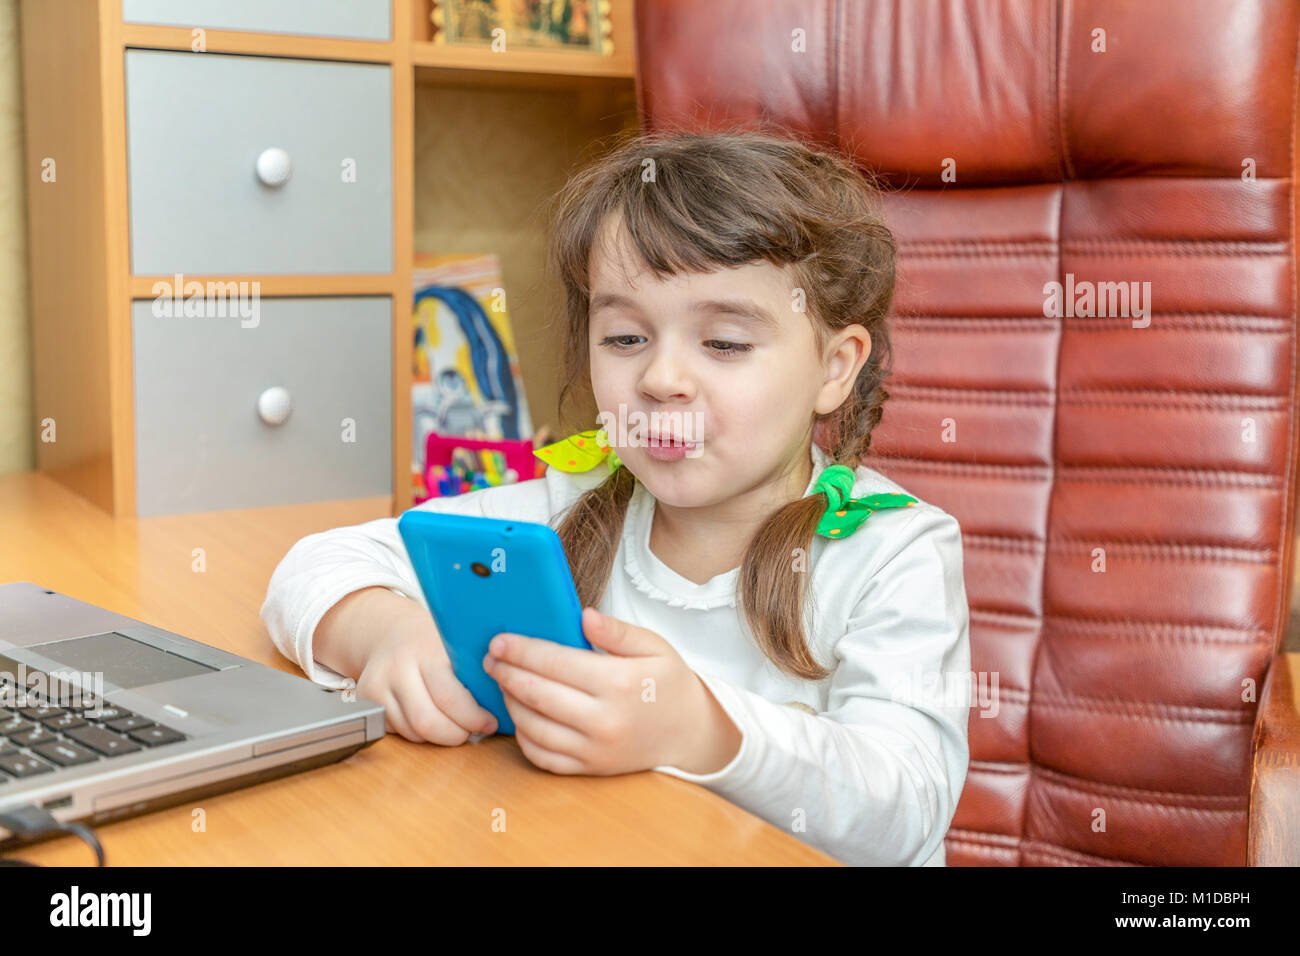 Little girl with smartphone an notebook Stock Photo